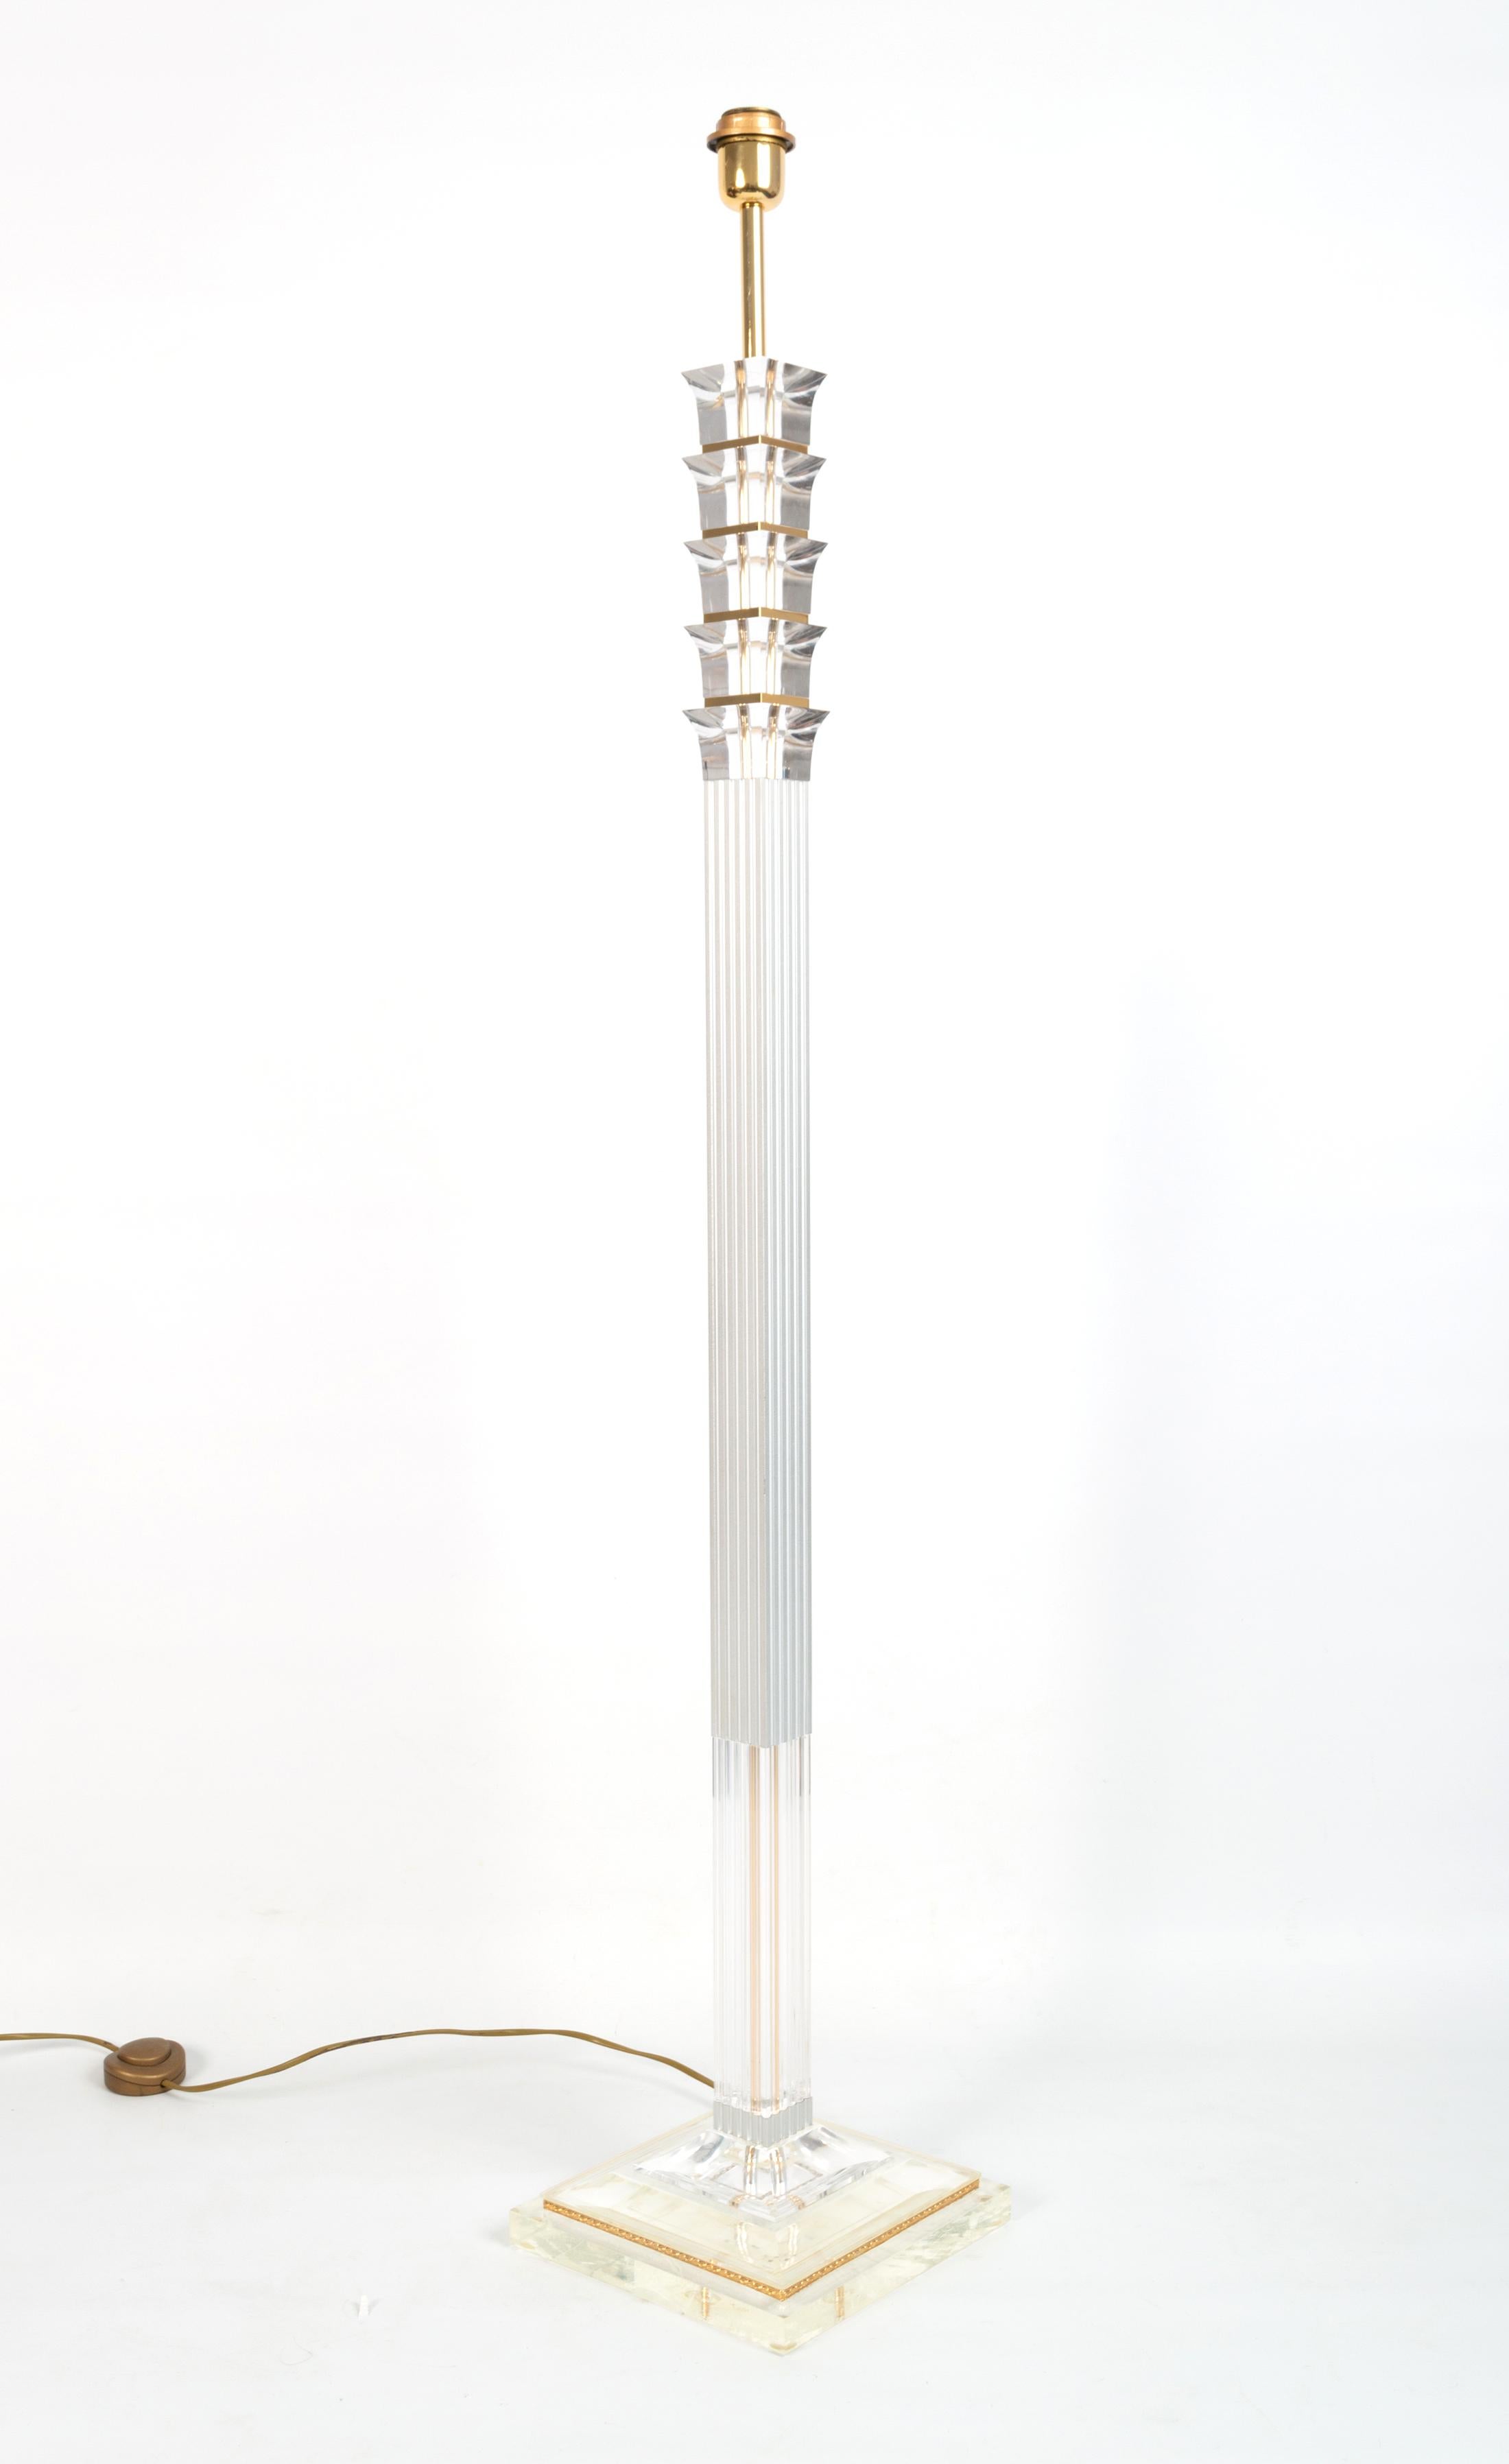 A French lucite and gilt floor lamp C.1970
Elegant Hollywood Regency neo-classical Design
In excellent condition commensurate of age.